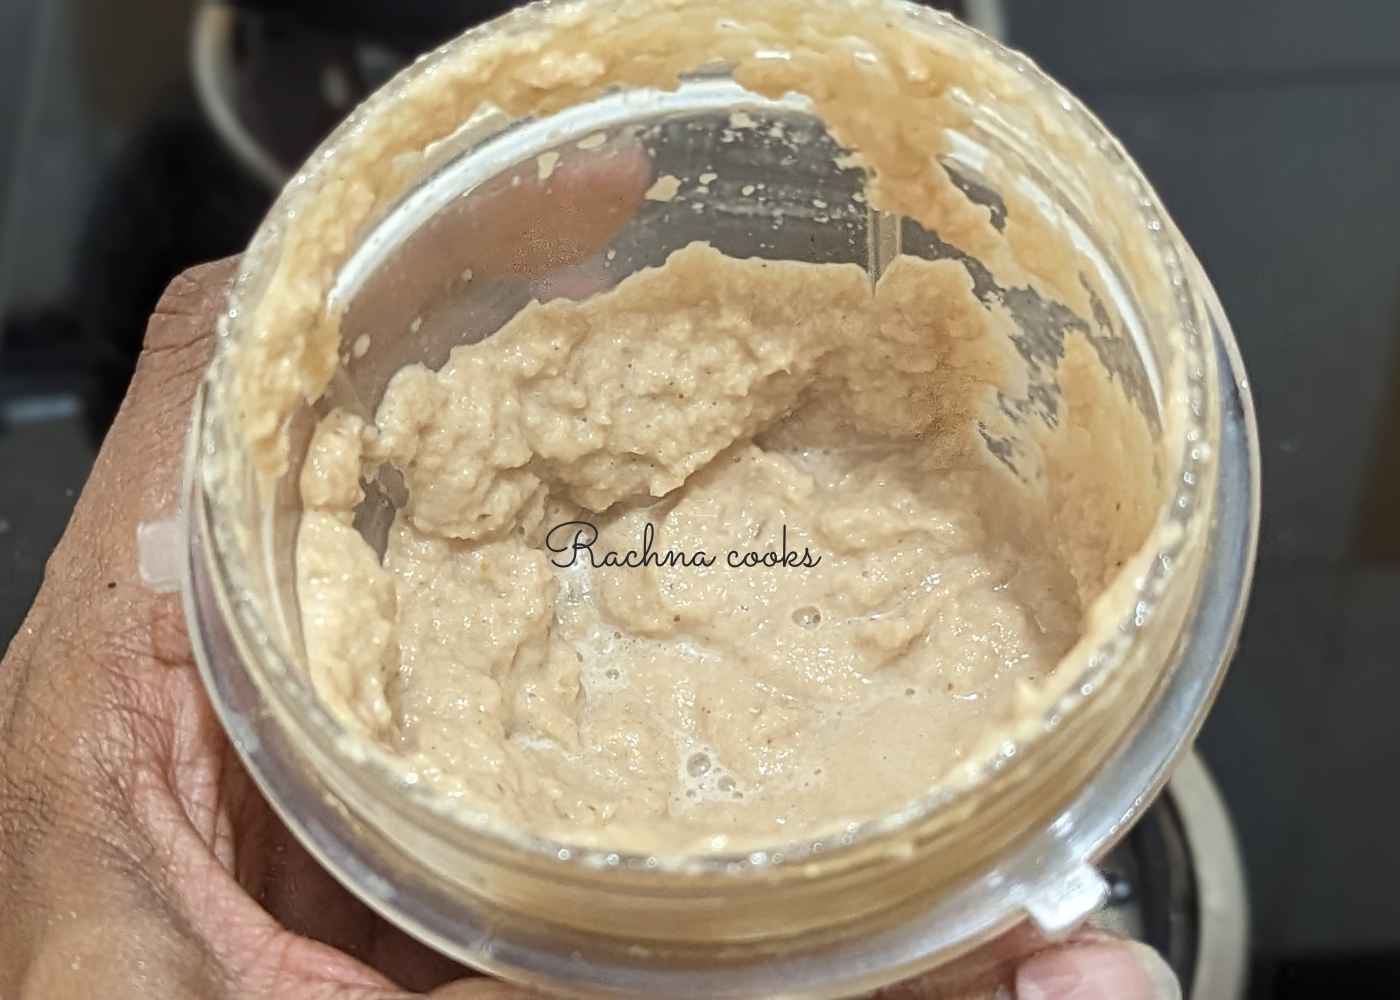 Sauteed onions blended in a blender jar.